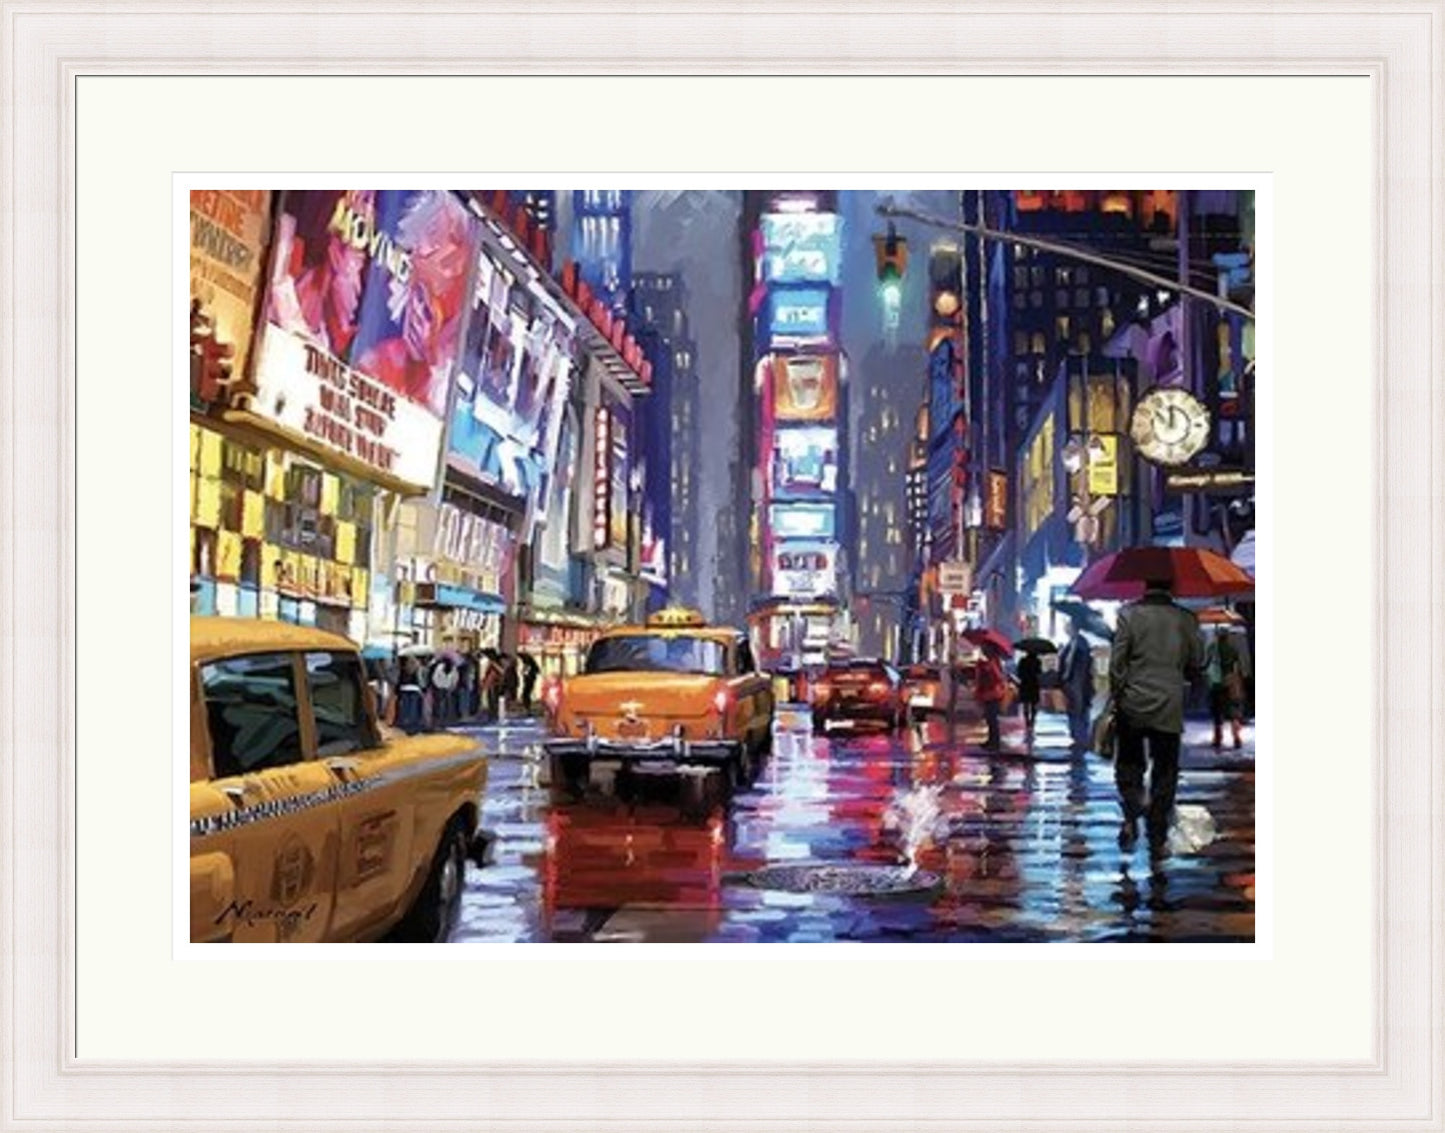 Times Square New York by Richard Macneil